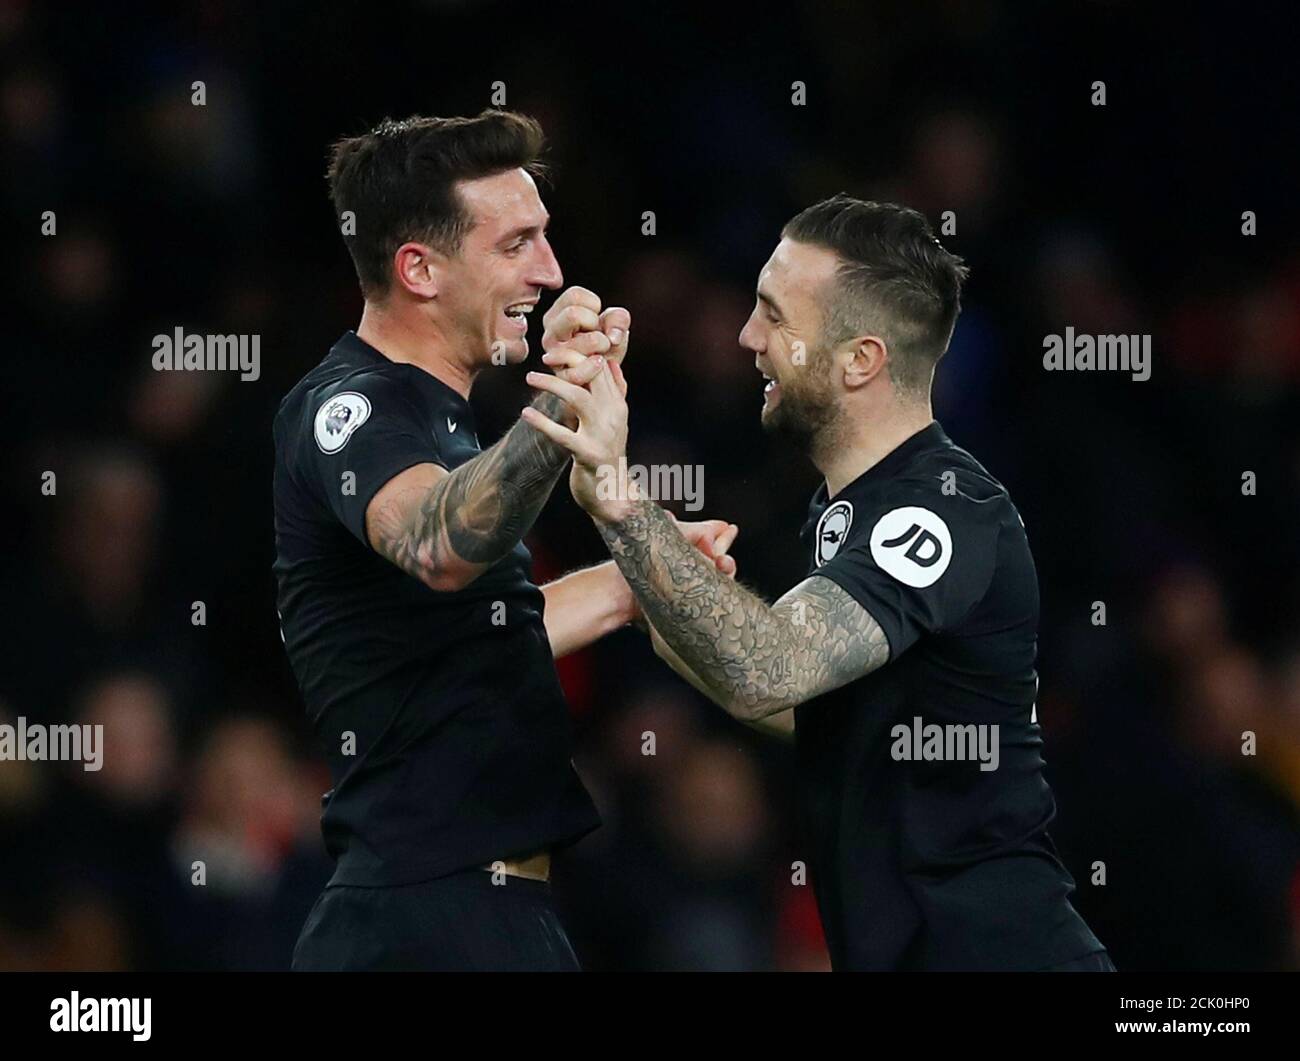 Soccer Football - Premier League - Arsenal v Brighton & Hove Albion - Emirates Stadium, London, Britain - December 5, 2019   Brighton & Hove Albion's Lewis Dunk and Shane Duffy celebrate after the match               REUTERS/Eddie Keogh    EDITORIAL USE ONLY. No use with unauthorized audio, video, data, fixture lists, club/league logos or 'live' services. Online in-match use limited to 75 images, no video emulation. No use in betting, games or single club/league/player publications.  Please contact your account representative for further details. Stock Photo